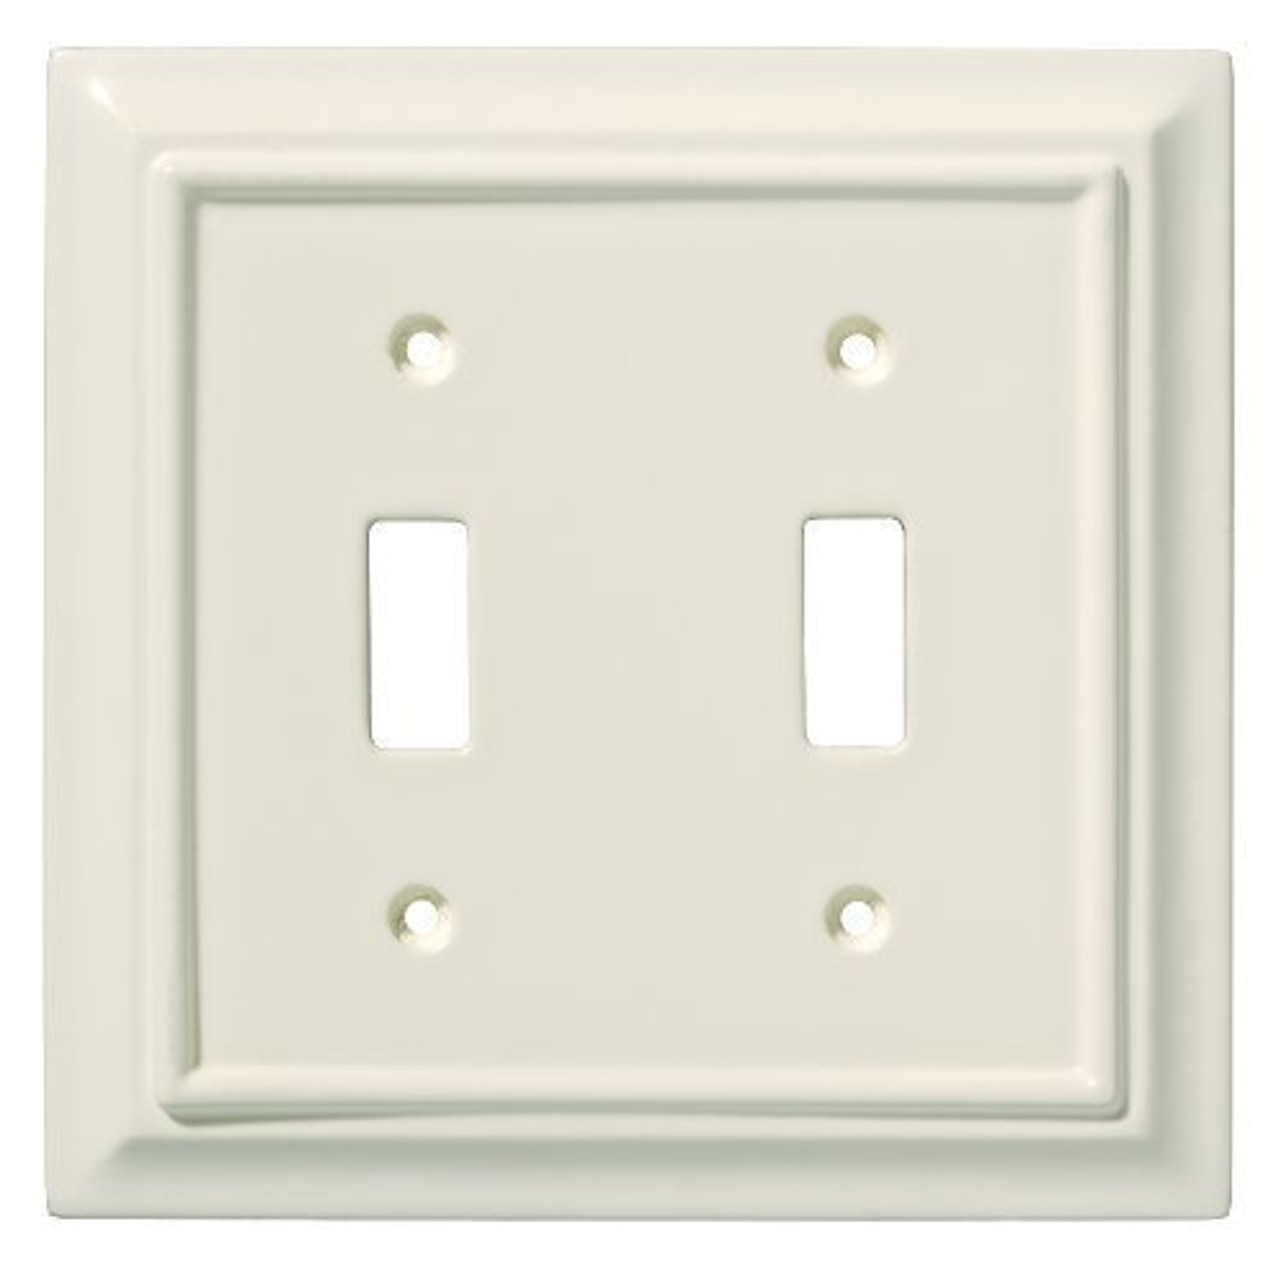 126447 Almond Architect Double Switch Cover Plate